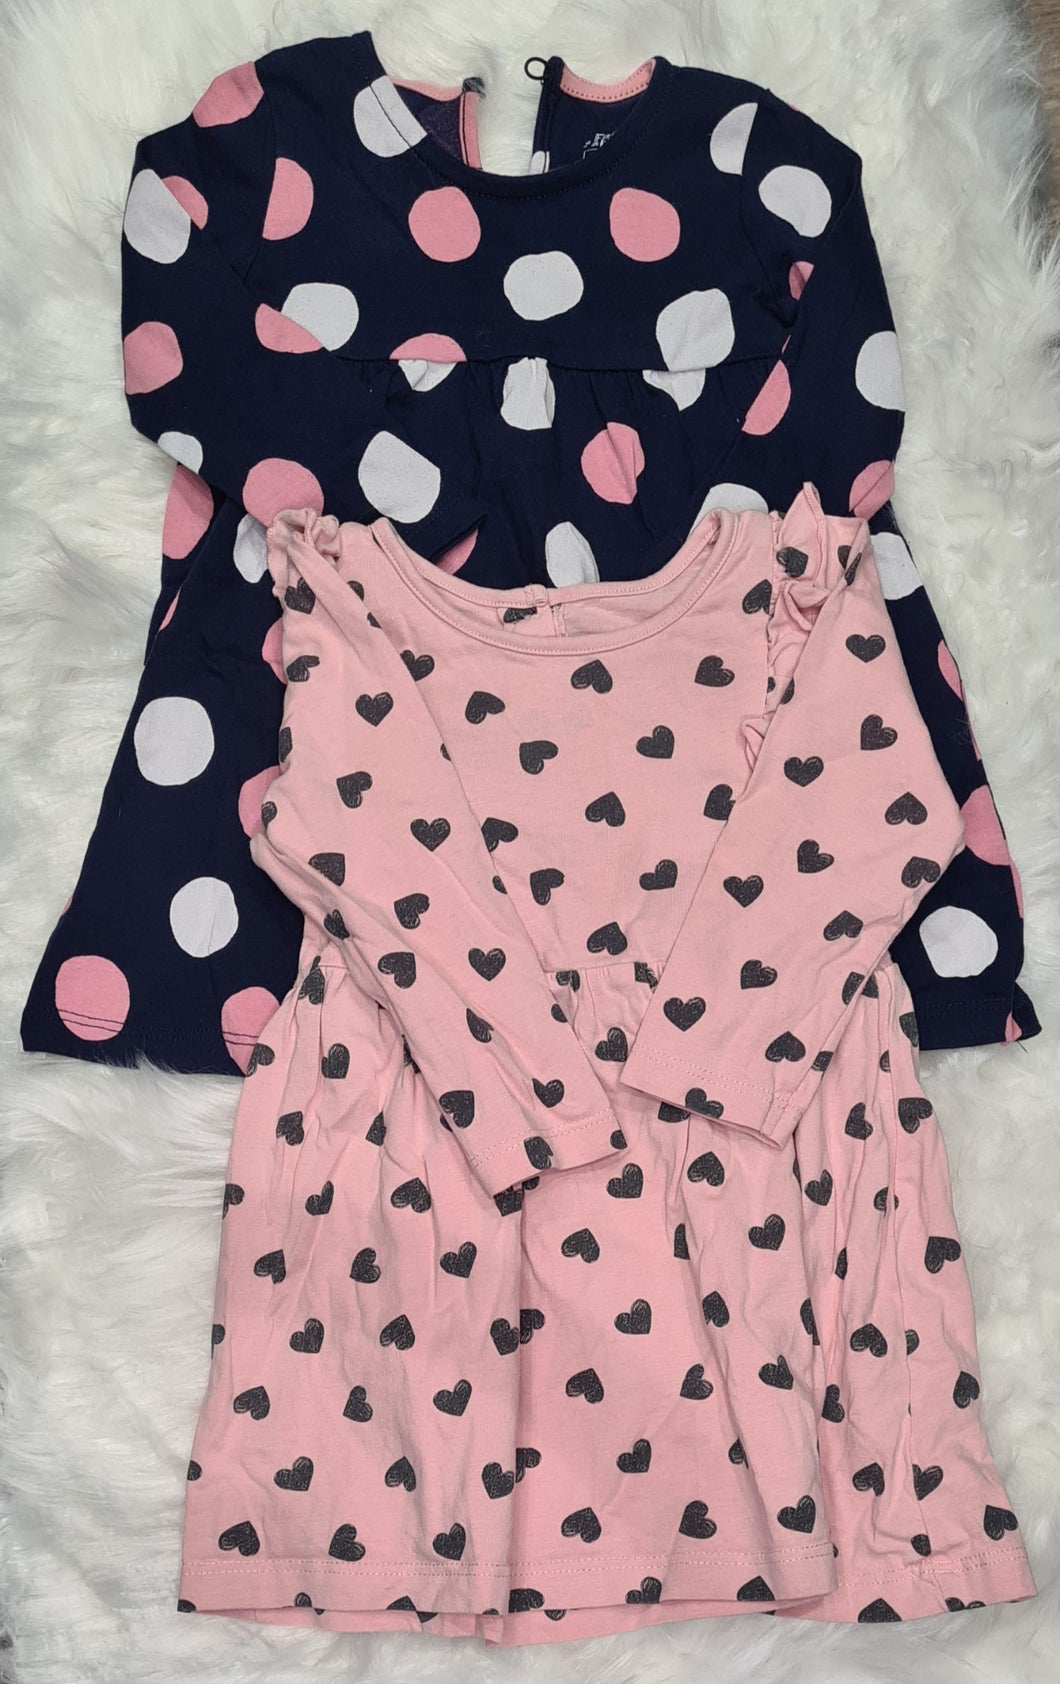 Girls 9-12 Months - Bundle of Two Spotty Dresses - Blue and Pink